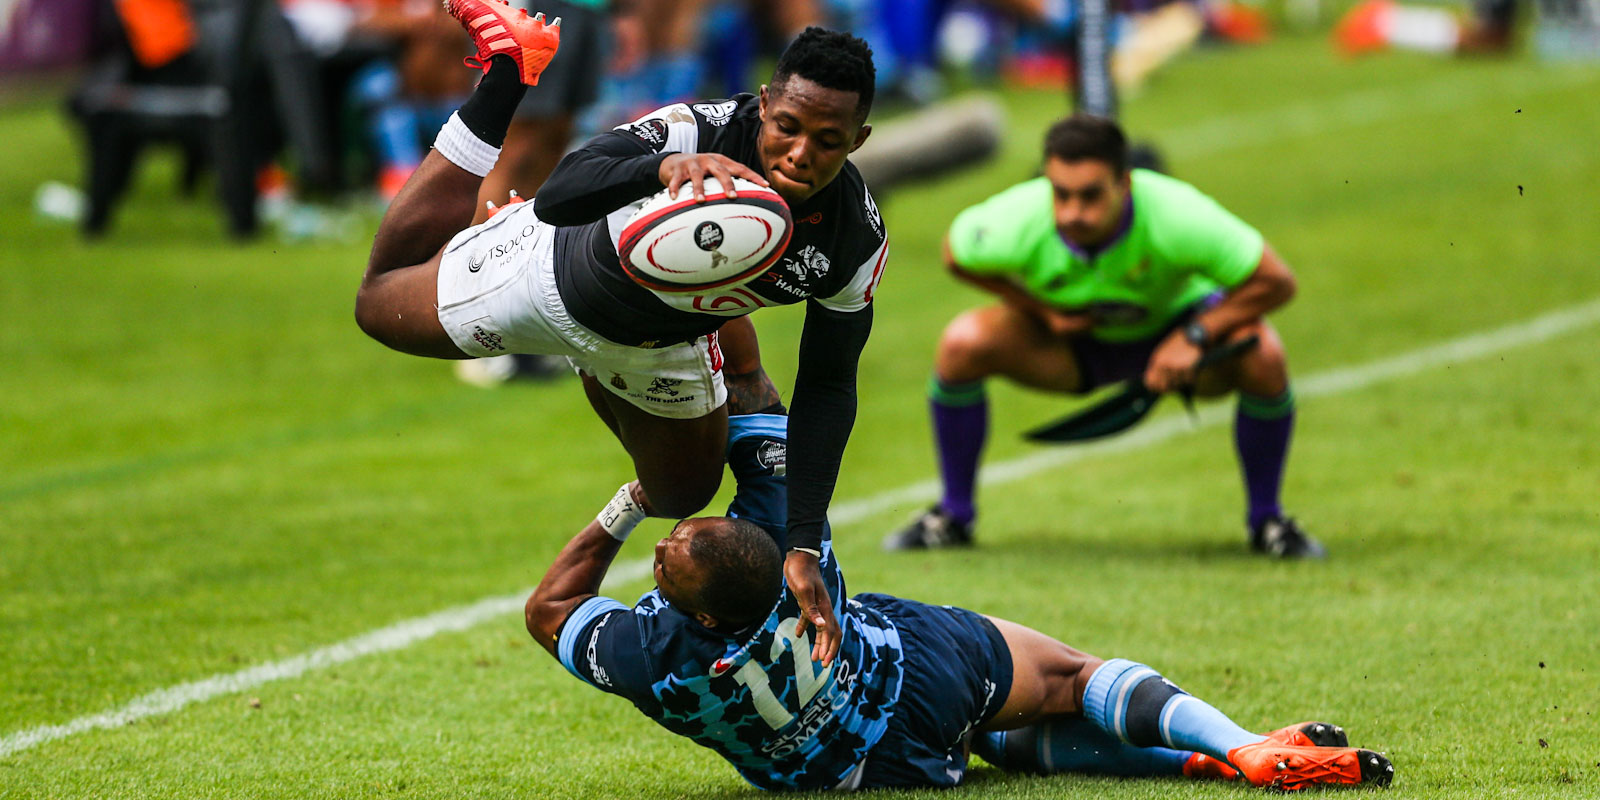 Sbu Nkosi scored the Cell C Sharks' only try shortly before half-time.